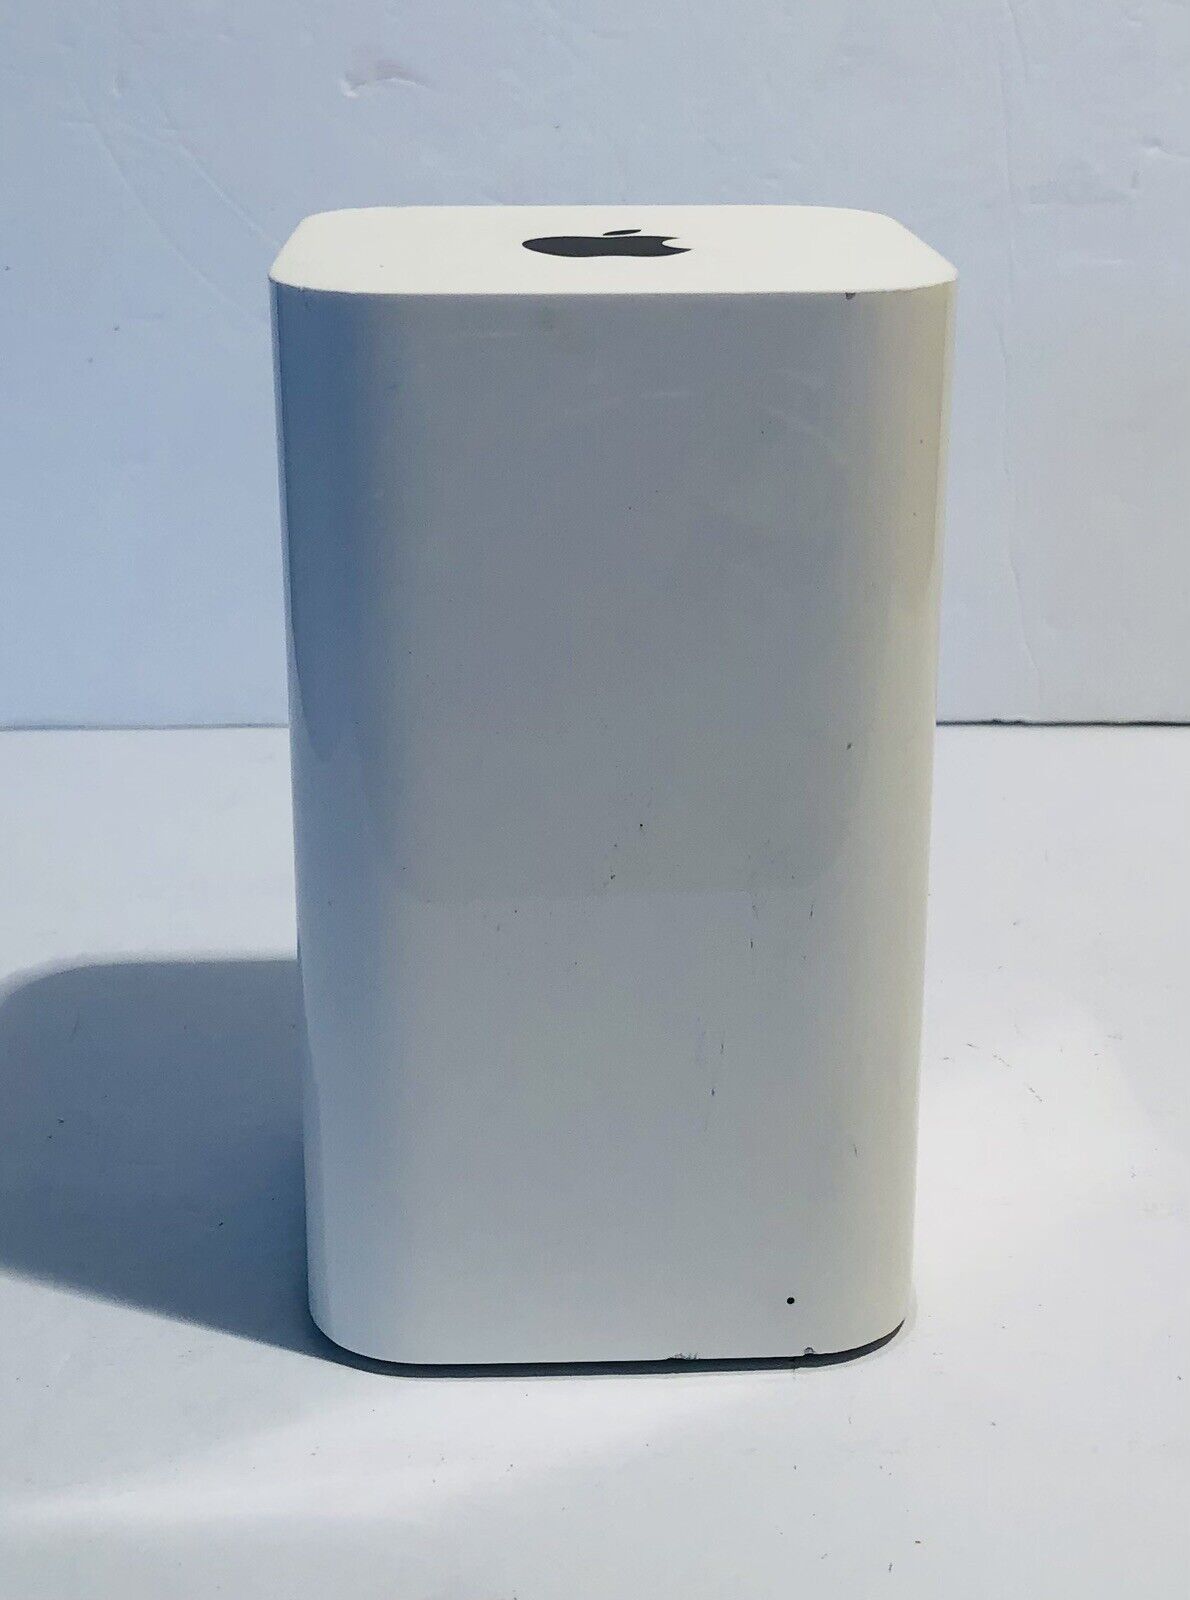 Apple AirPort Extreme Base Station A1521 Base Only No Power Cord